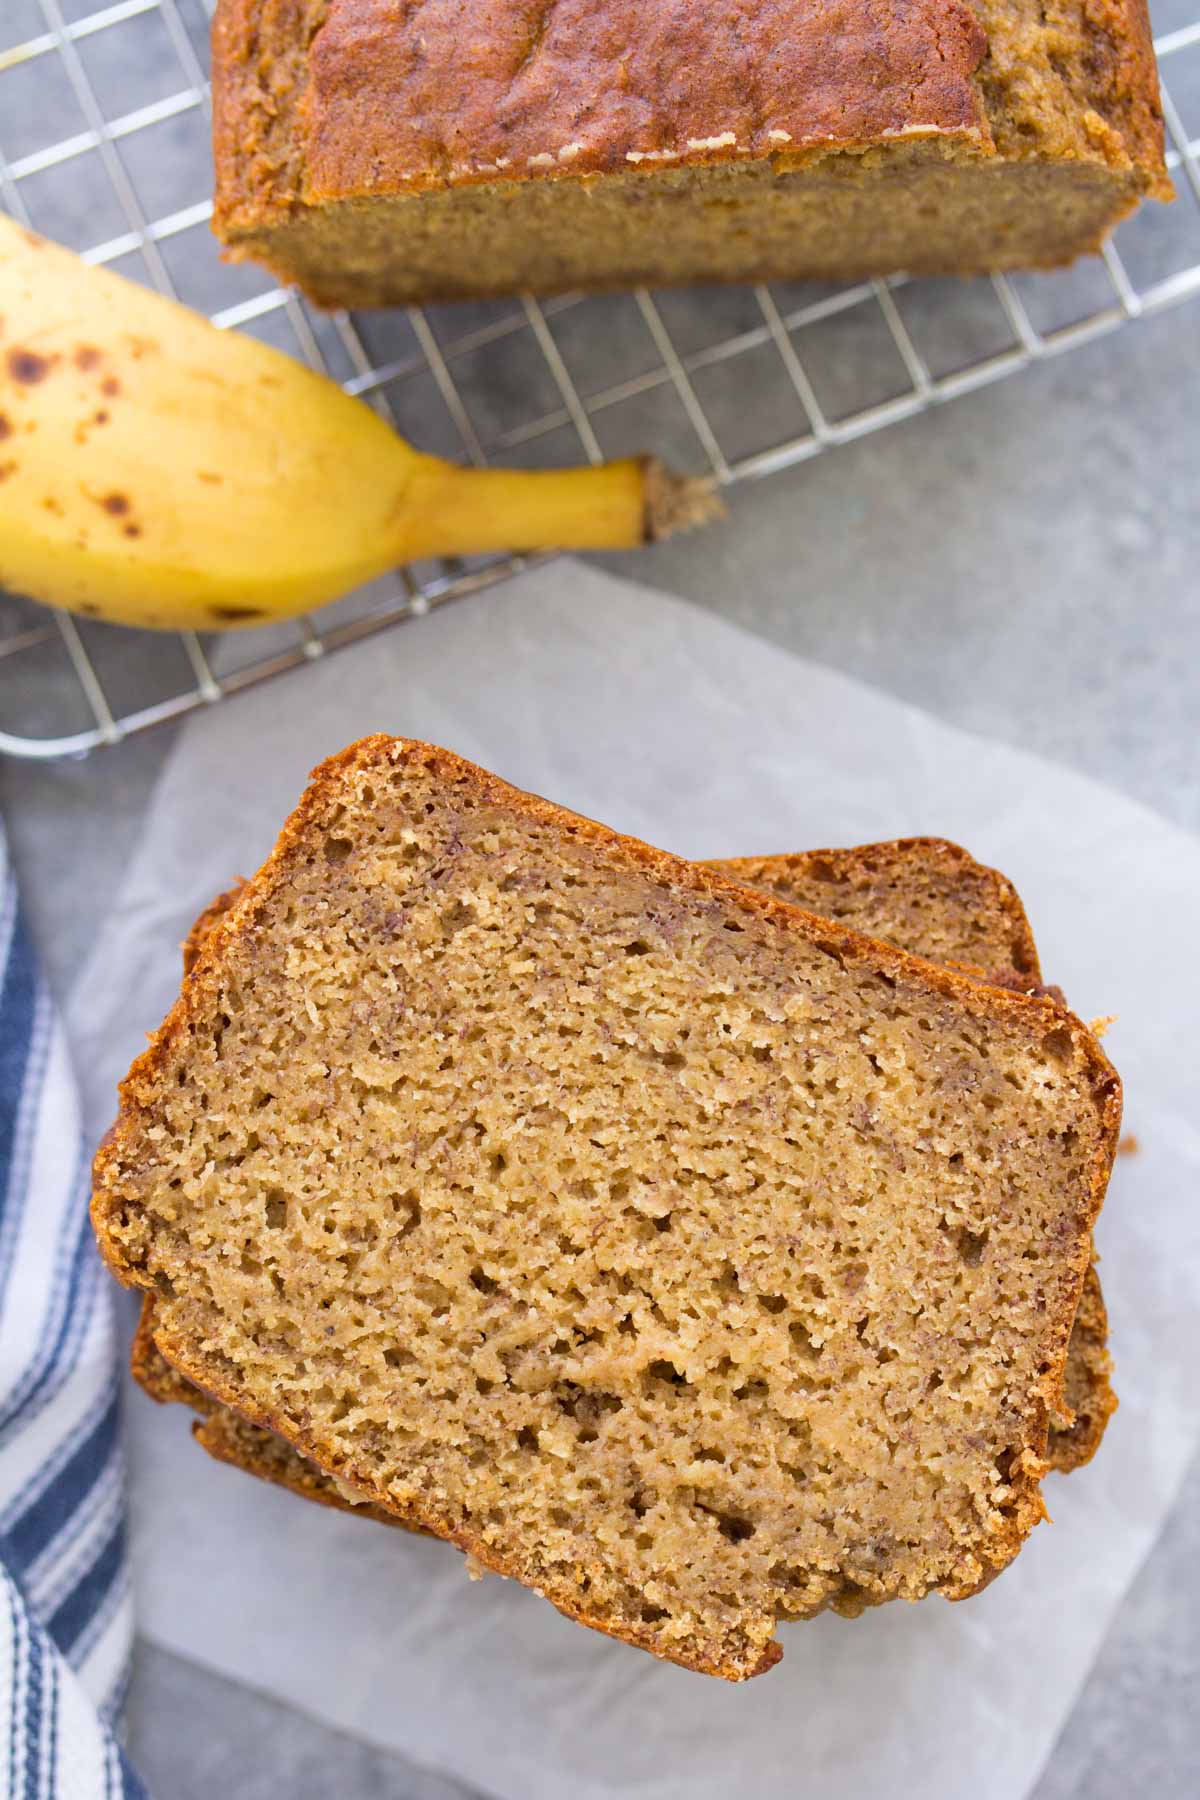 Slices of healthy banana bread stacked on top of each other, showing the soft, moist texture.